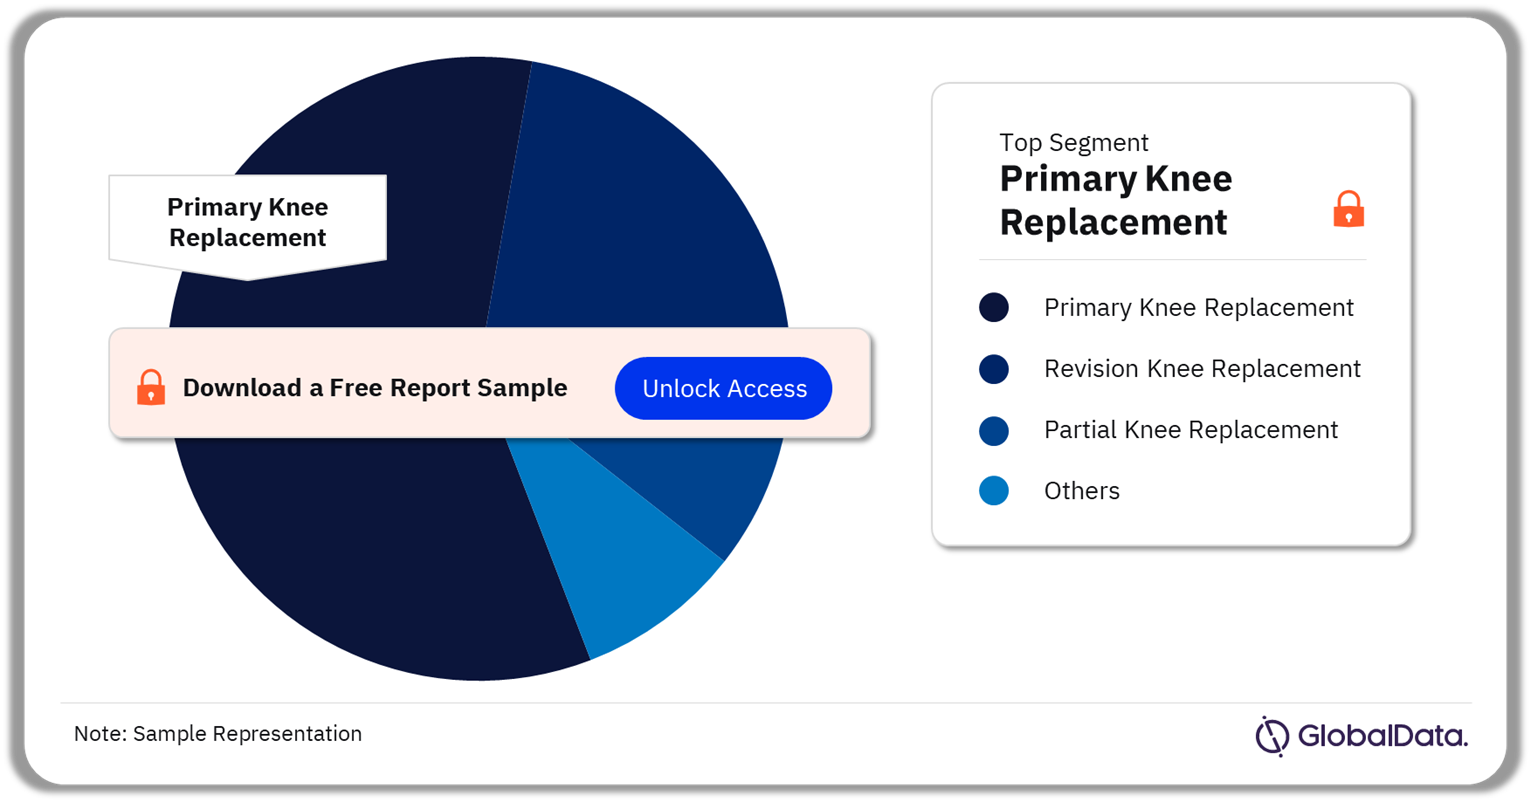 Knee Reconstruction Pipeline Market Analysis by Segments, 2023 (%)